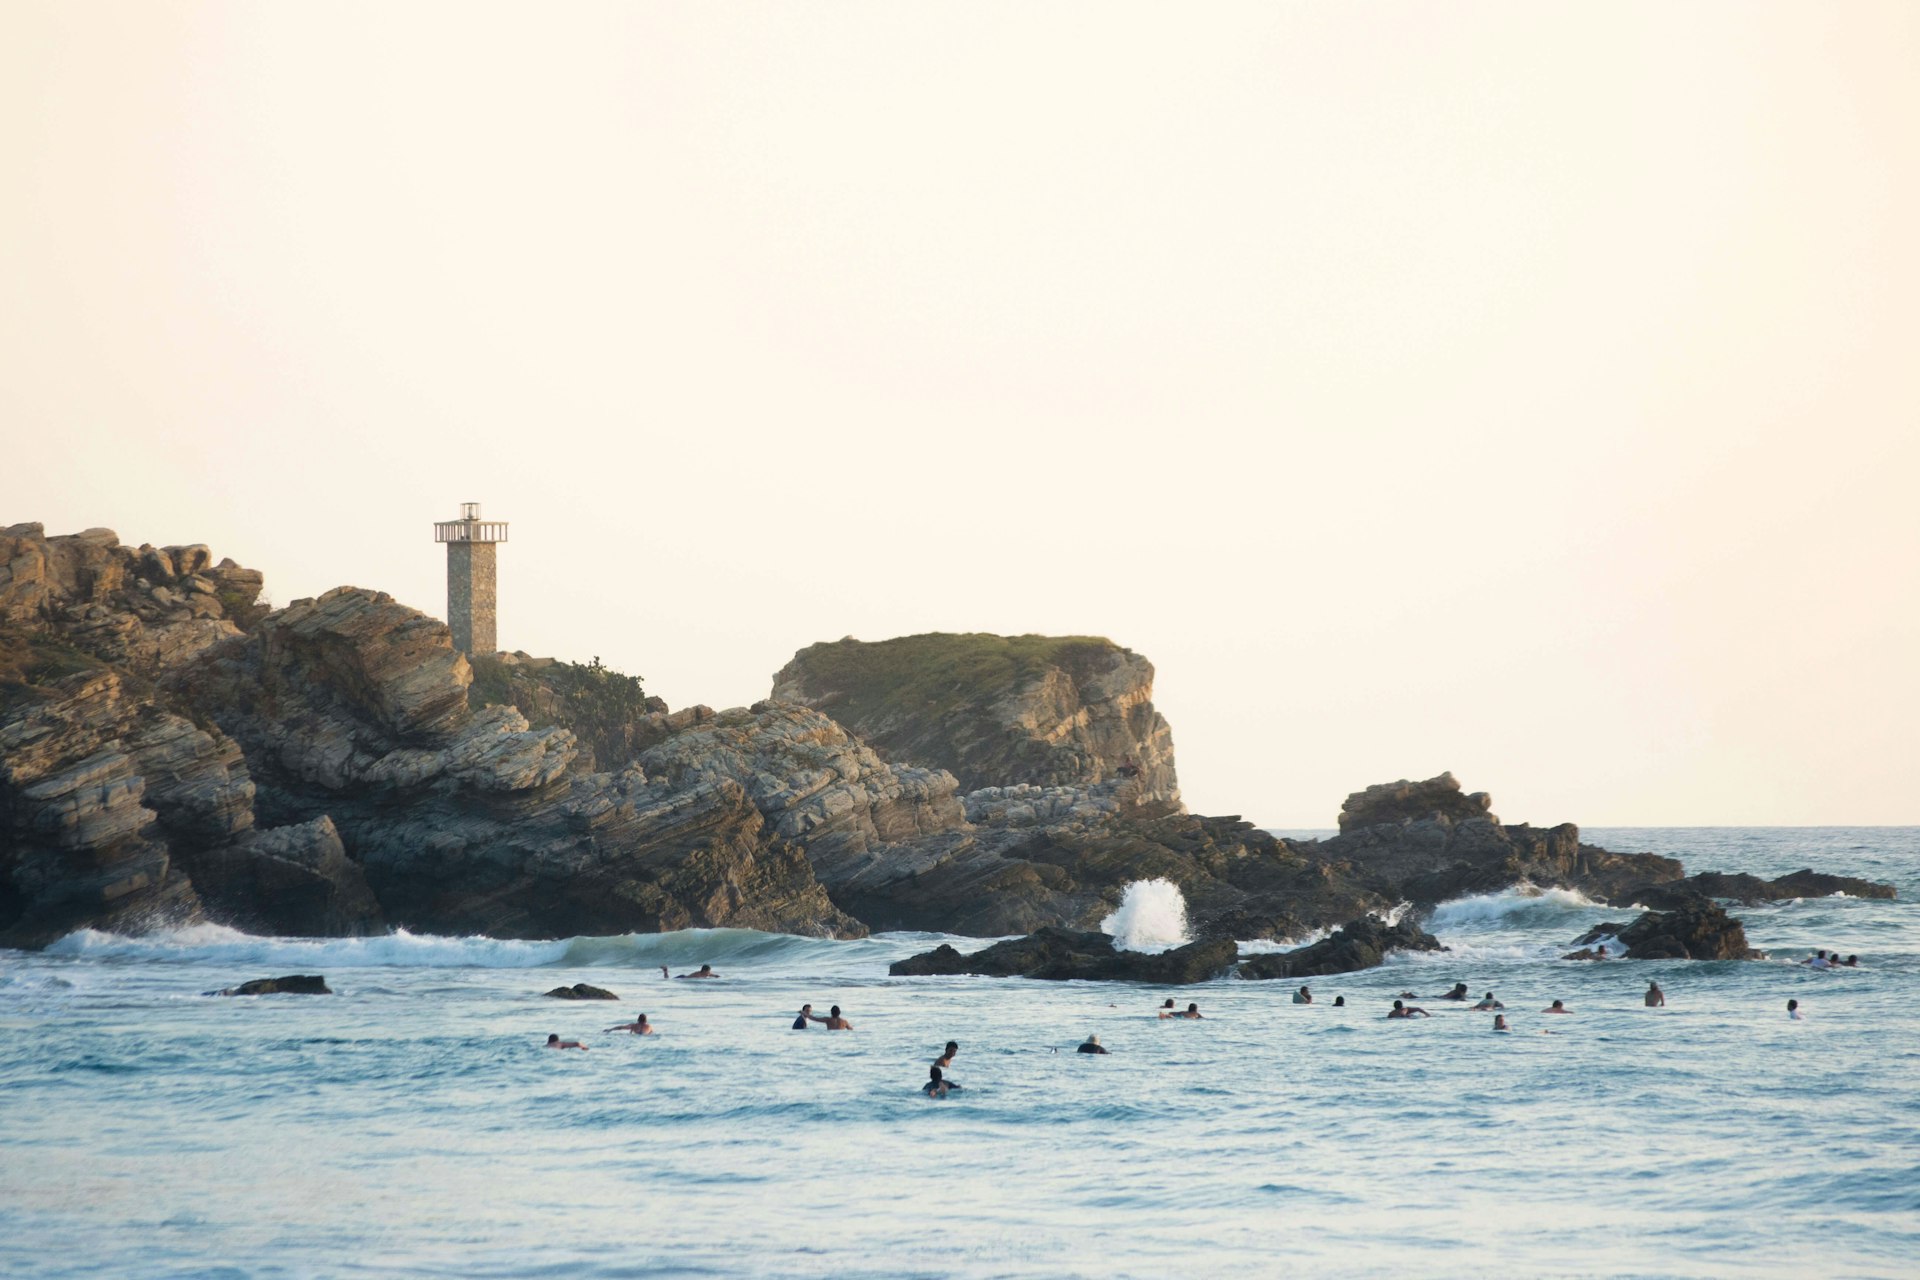 Evening light paints the lighthouse of Punta Zicatela, while many surfers pack the lineup in Puerto Escondido, Mexico